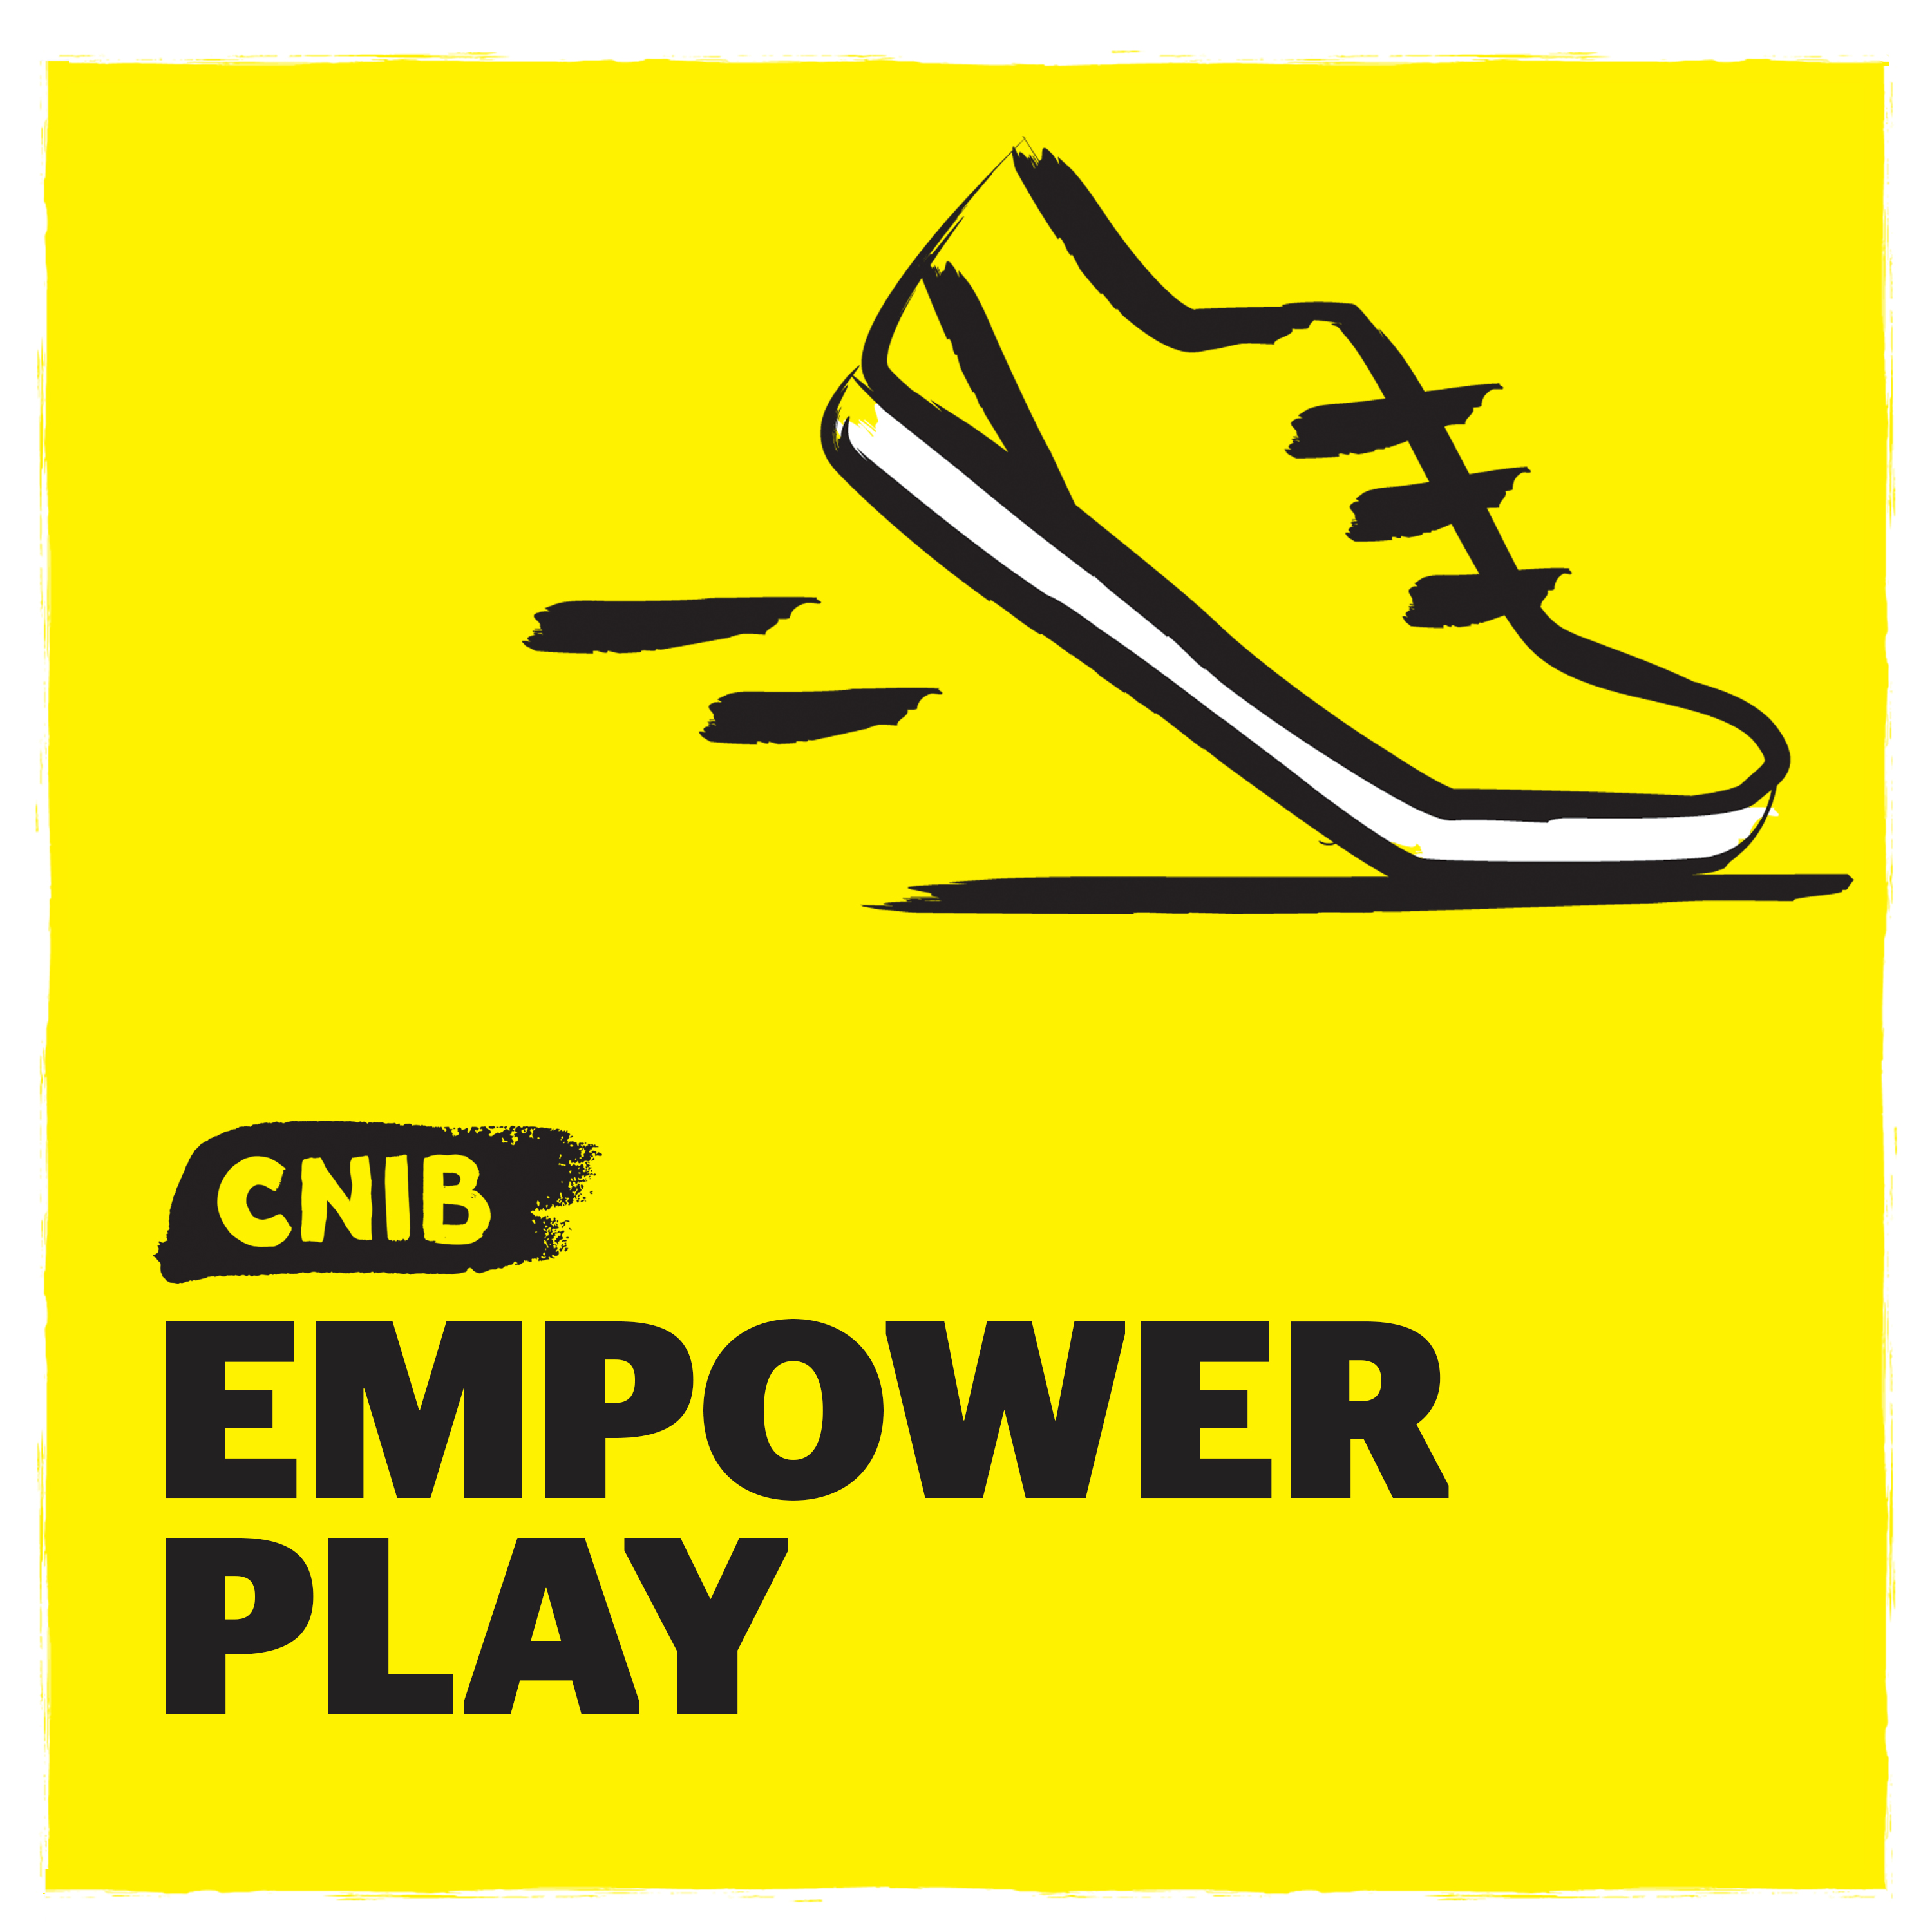 CNIB EmpowerPlay logo. An illustration of a running shoe on a yellow background.